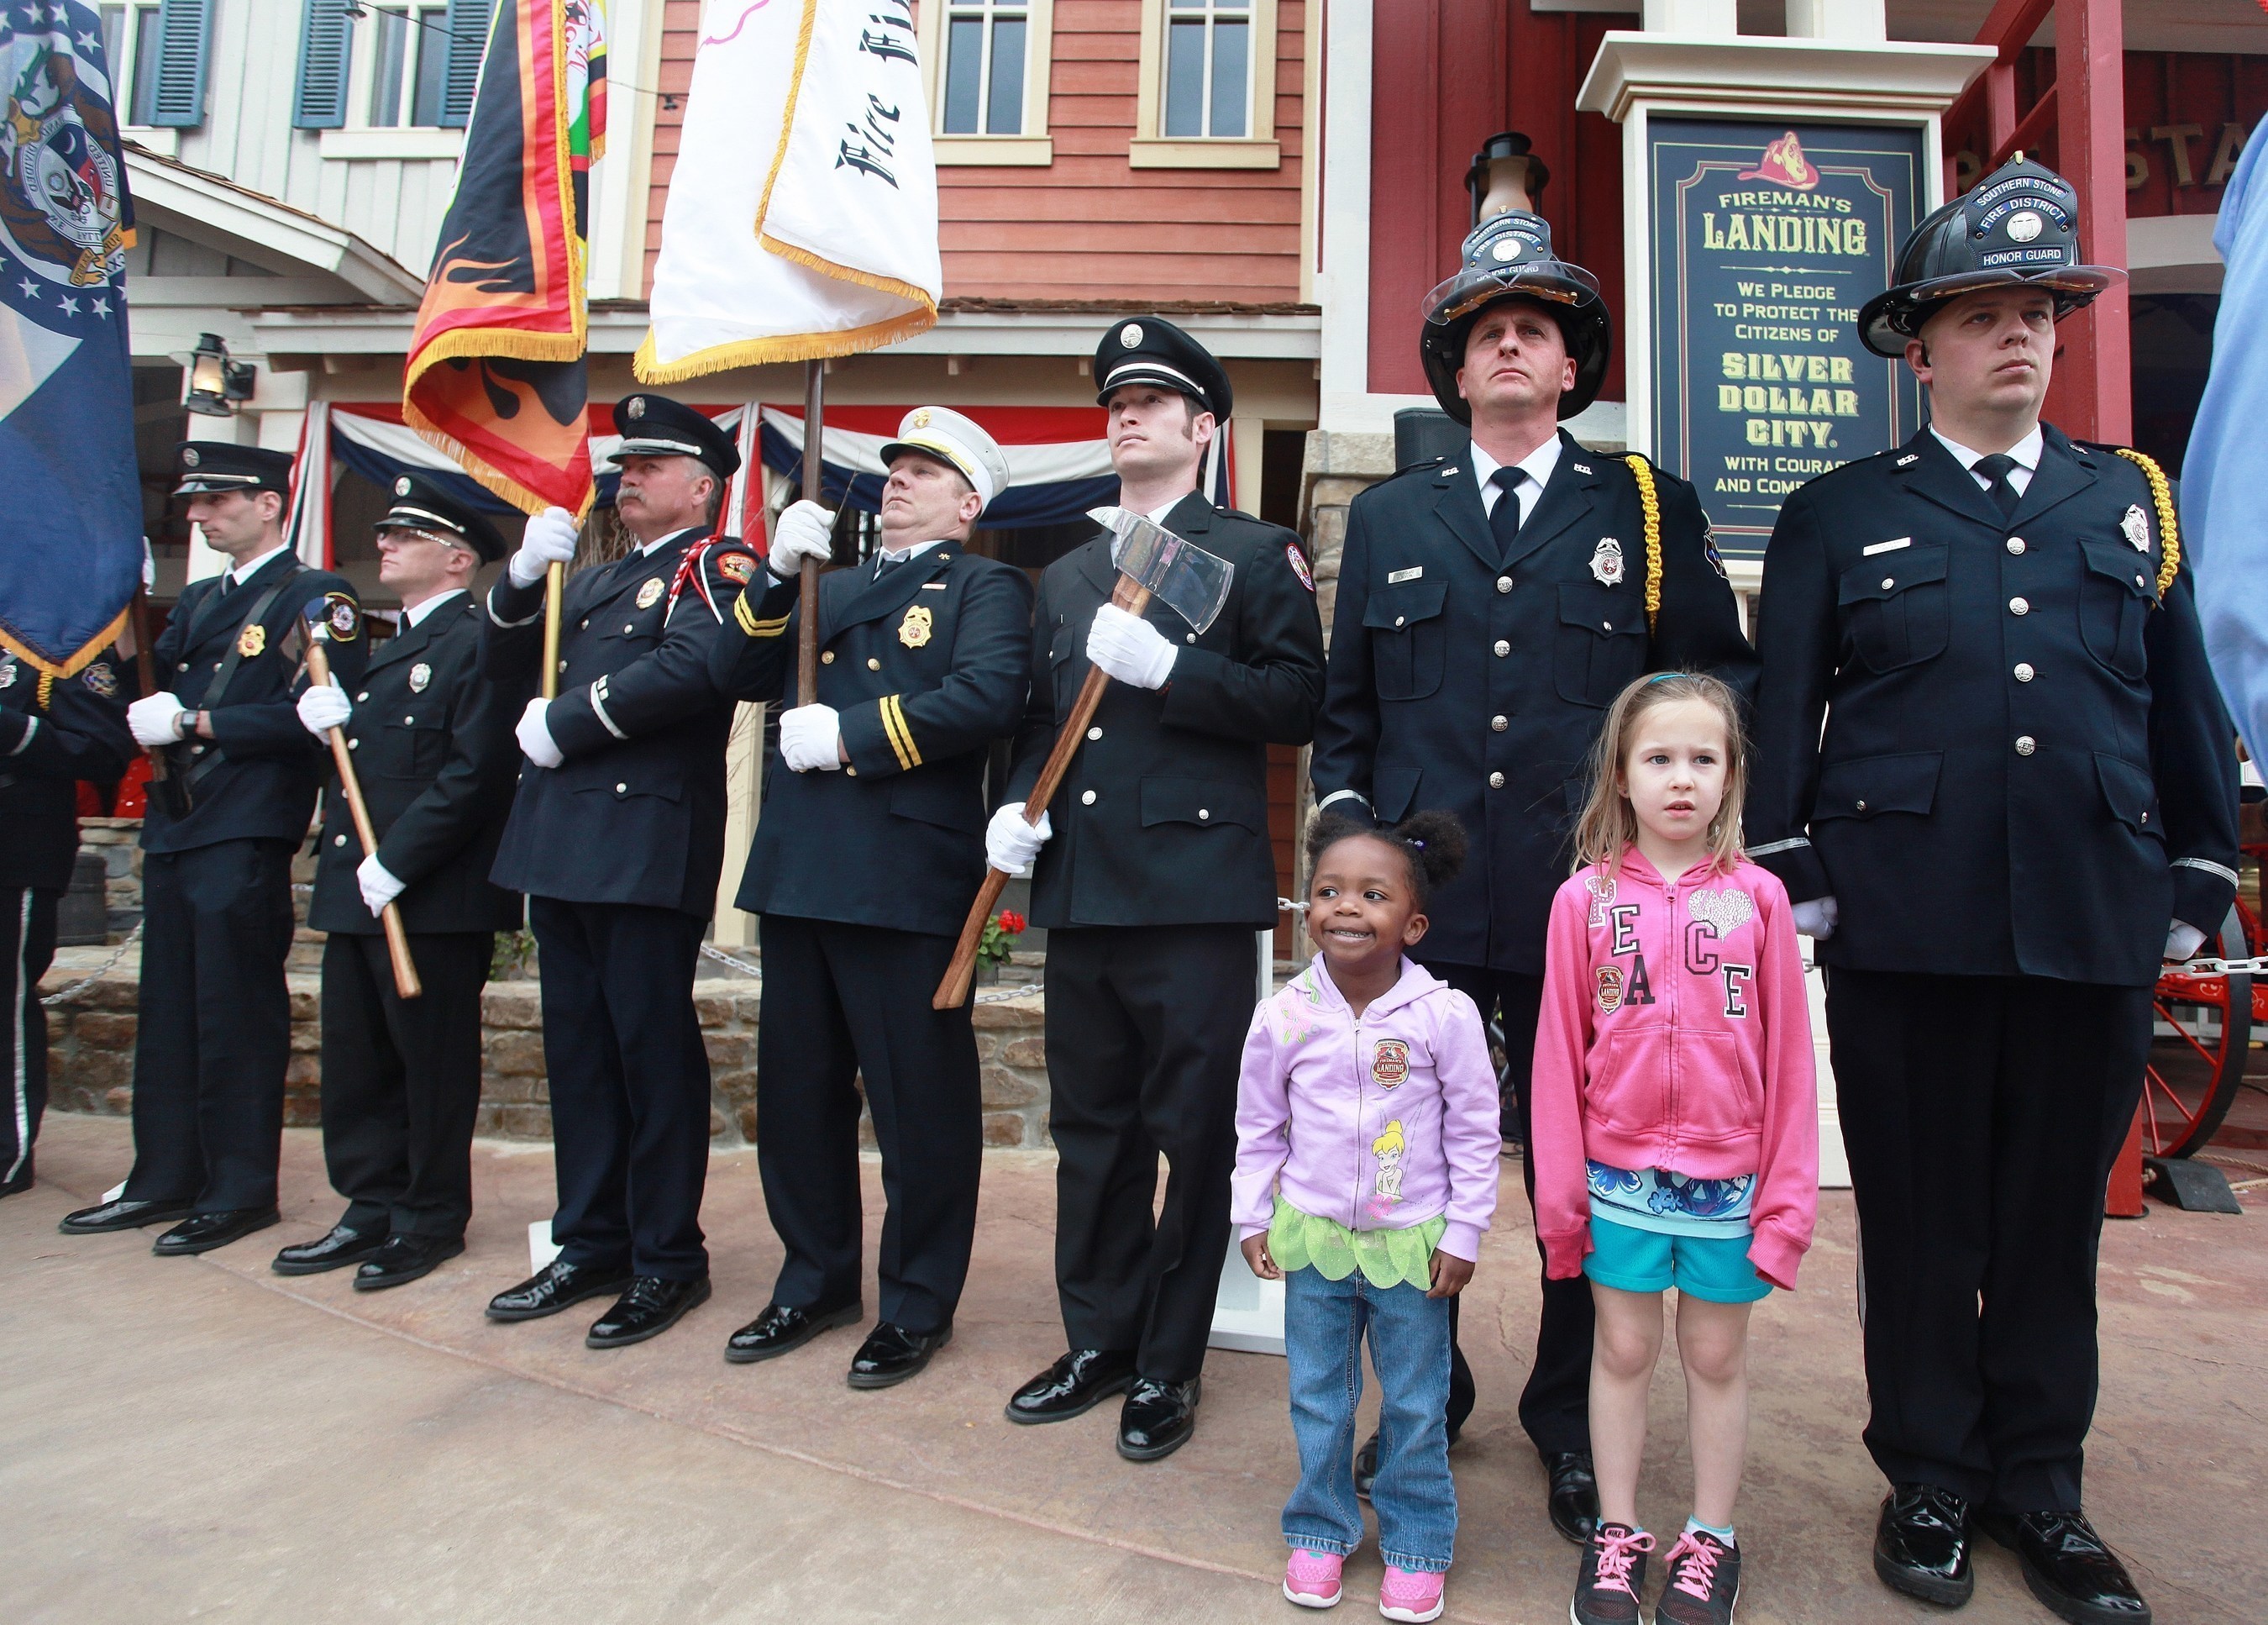 Kids join firefighters to take the Firefighter's Pledge at the grand opening of Fireman's Landing at Silver Dollar City in Branson, Missouri.